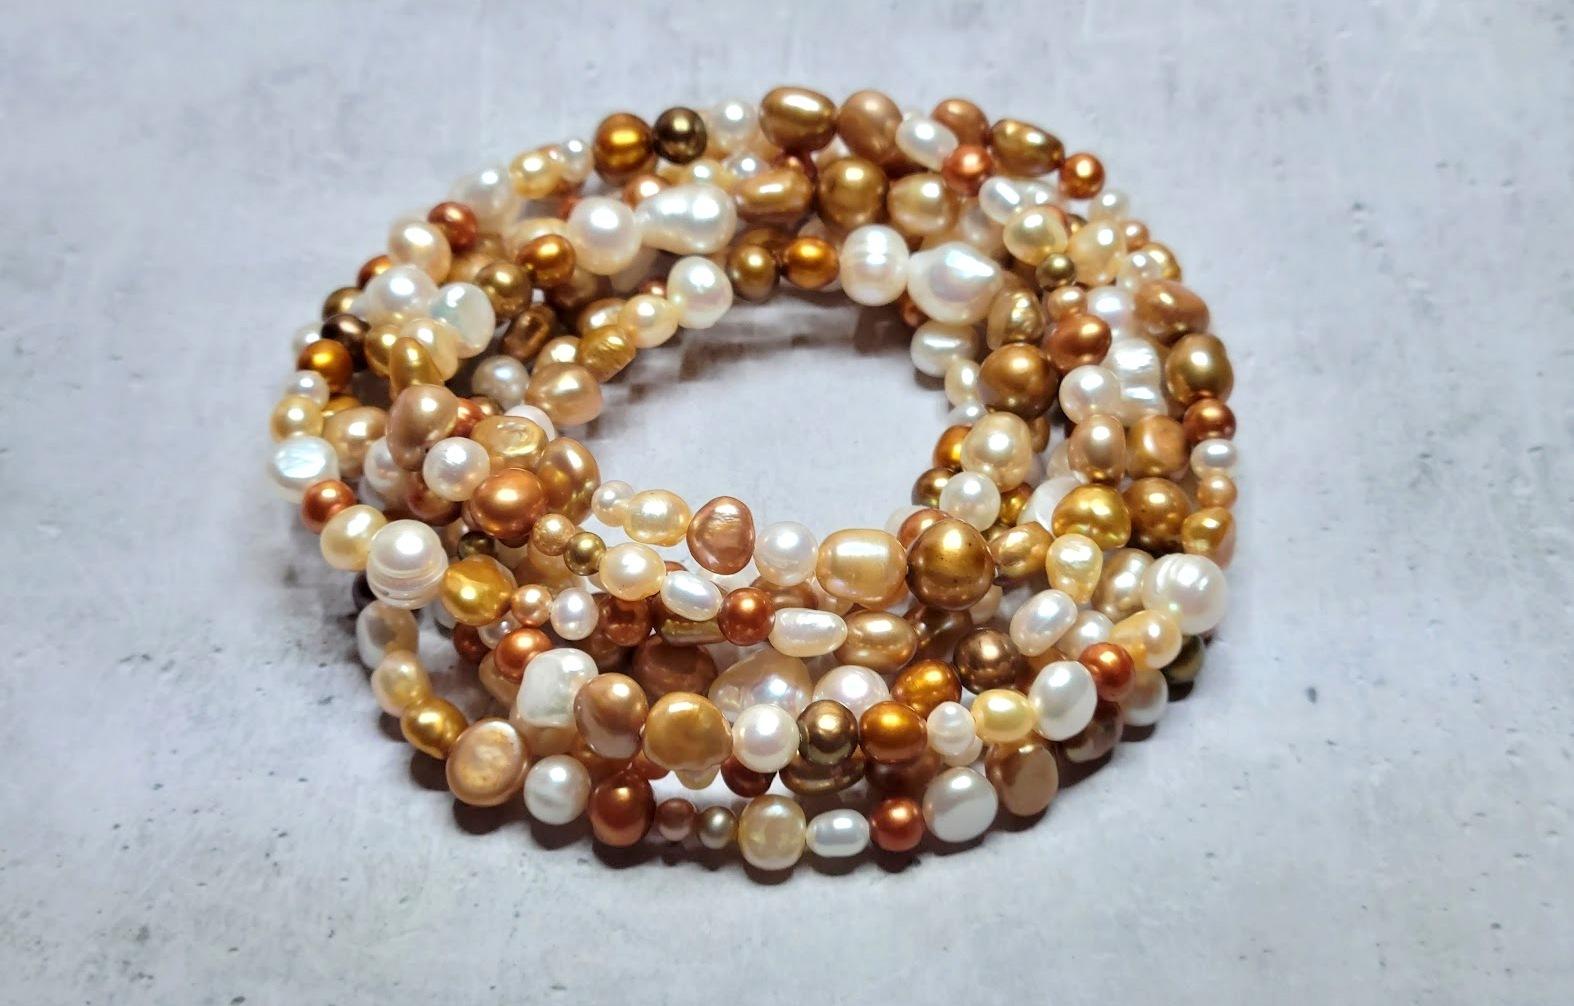 An amazing expression of modern chic and charm inspired by the birth of real pearls, this statement-long pearl necklace creates a playful, bright, and flirty look. Unlike the traditional round, the irregular shape adorns your image with a more